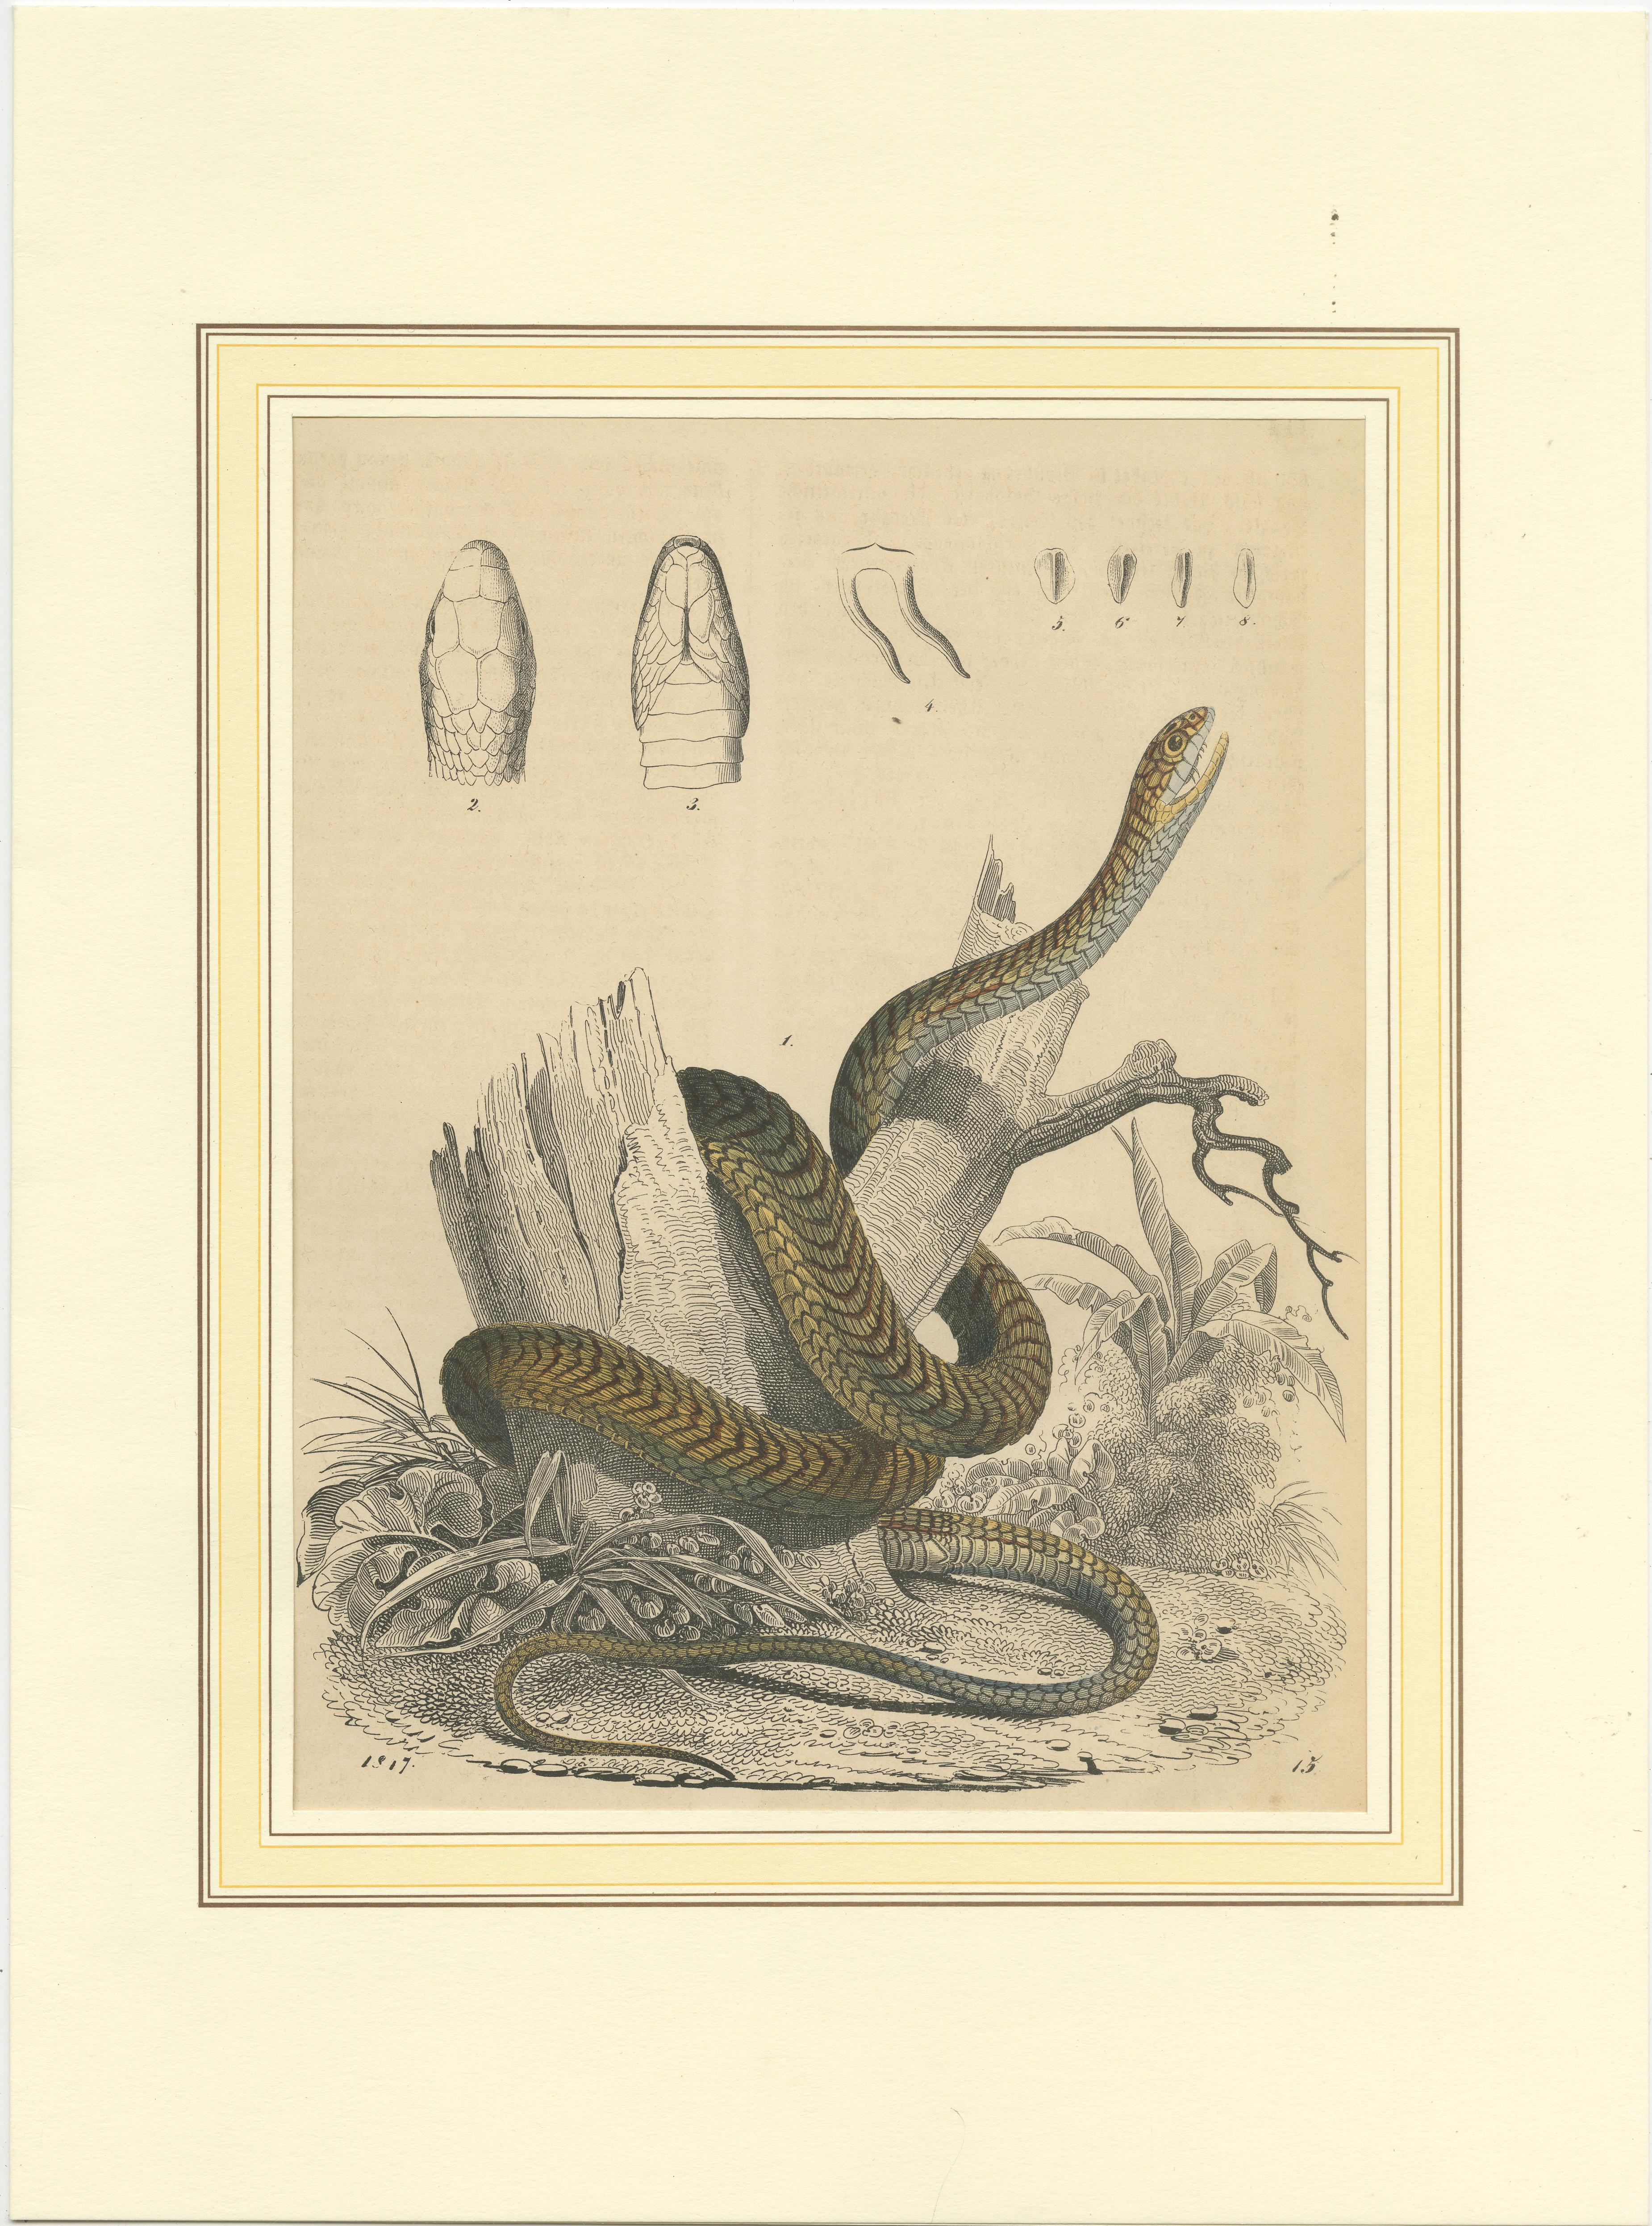 Antique print of a snake coiled around a tree. This print originates from 'Das Buch der Welt' published by Hoffmann, 1847. 